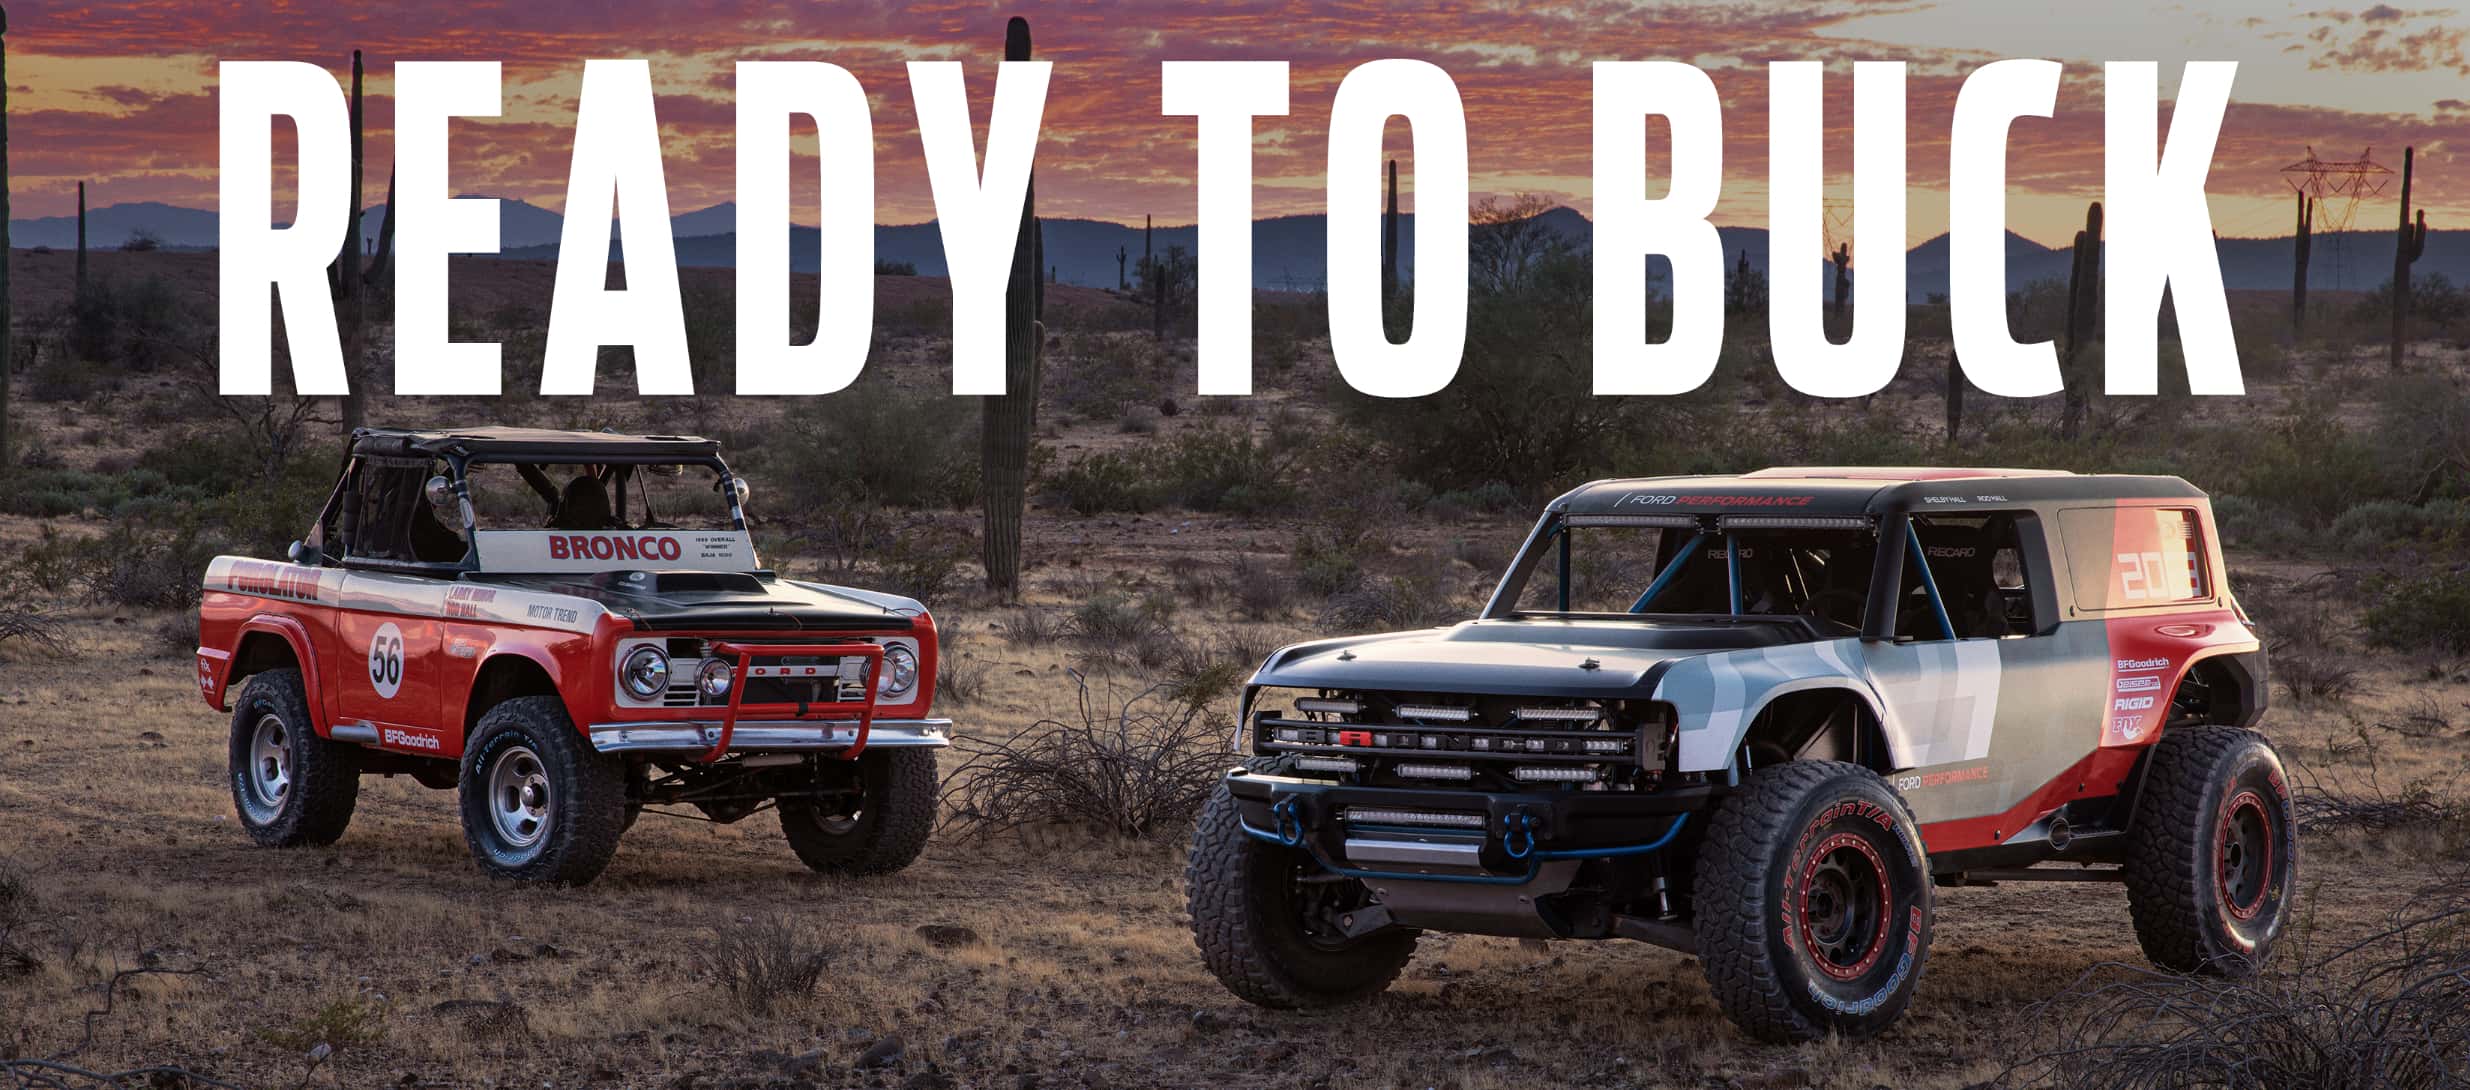 2021 Ford Bronco - Ready To Buck